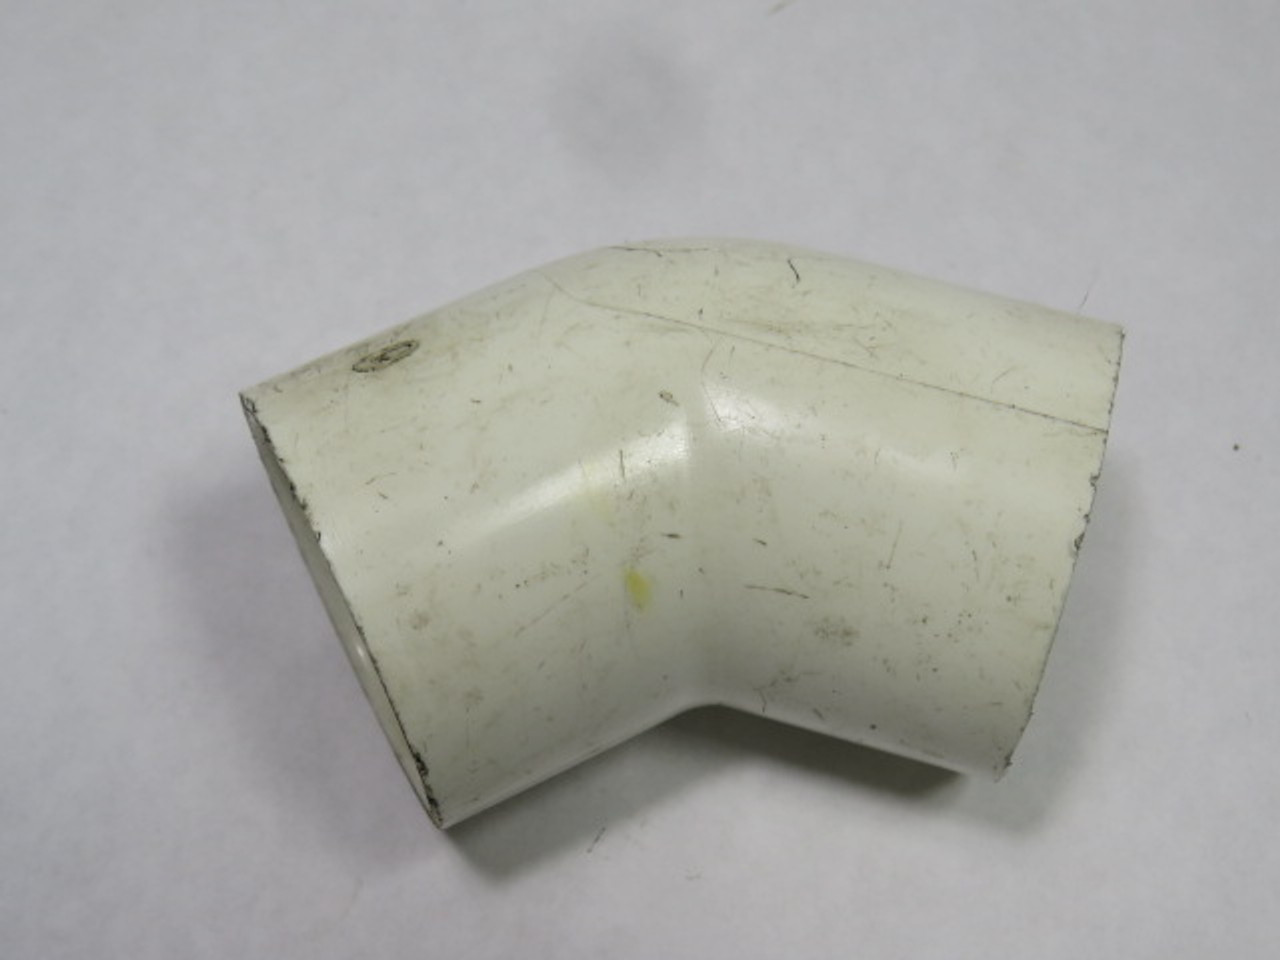 Spears 417-012 45 Degree PVC Elbow 1-1/4" USED